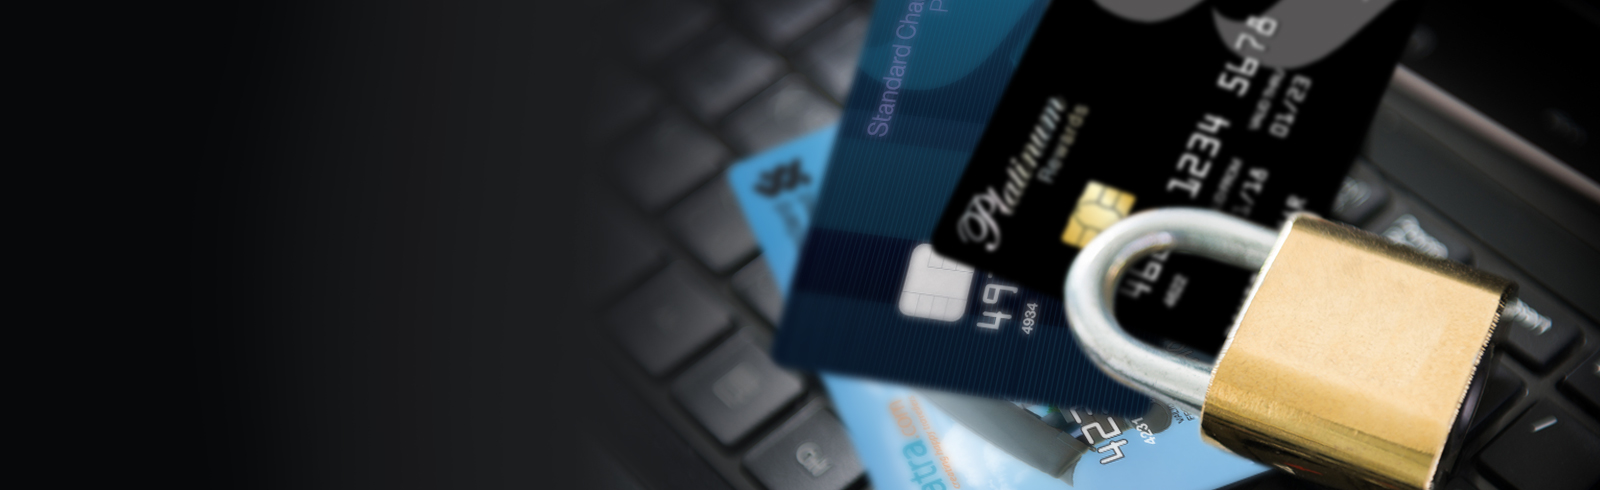 credit card fraud prevention protection